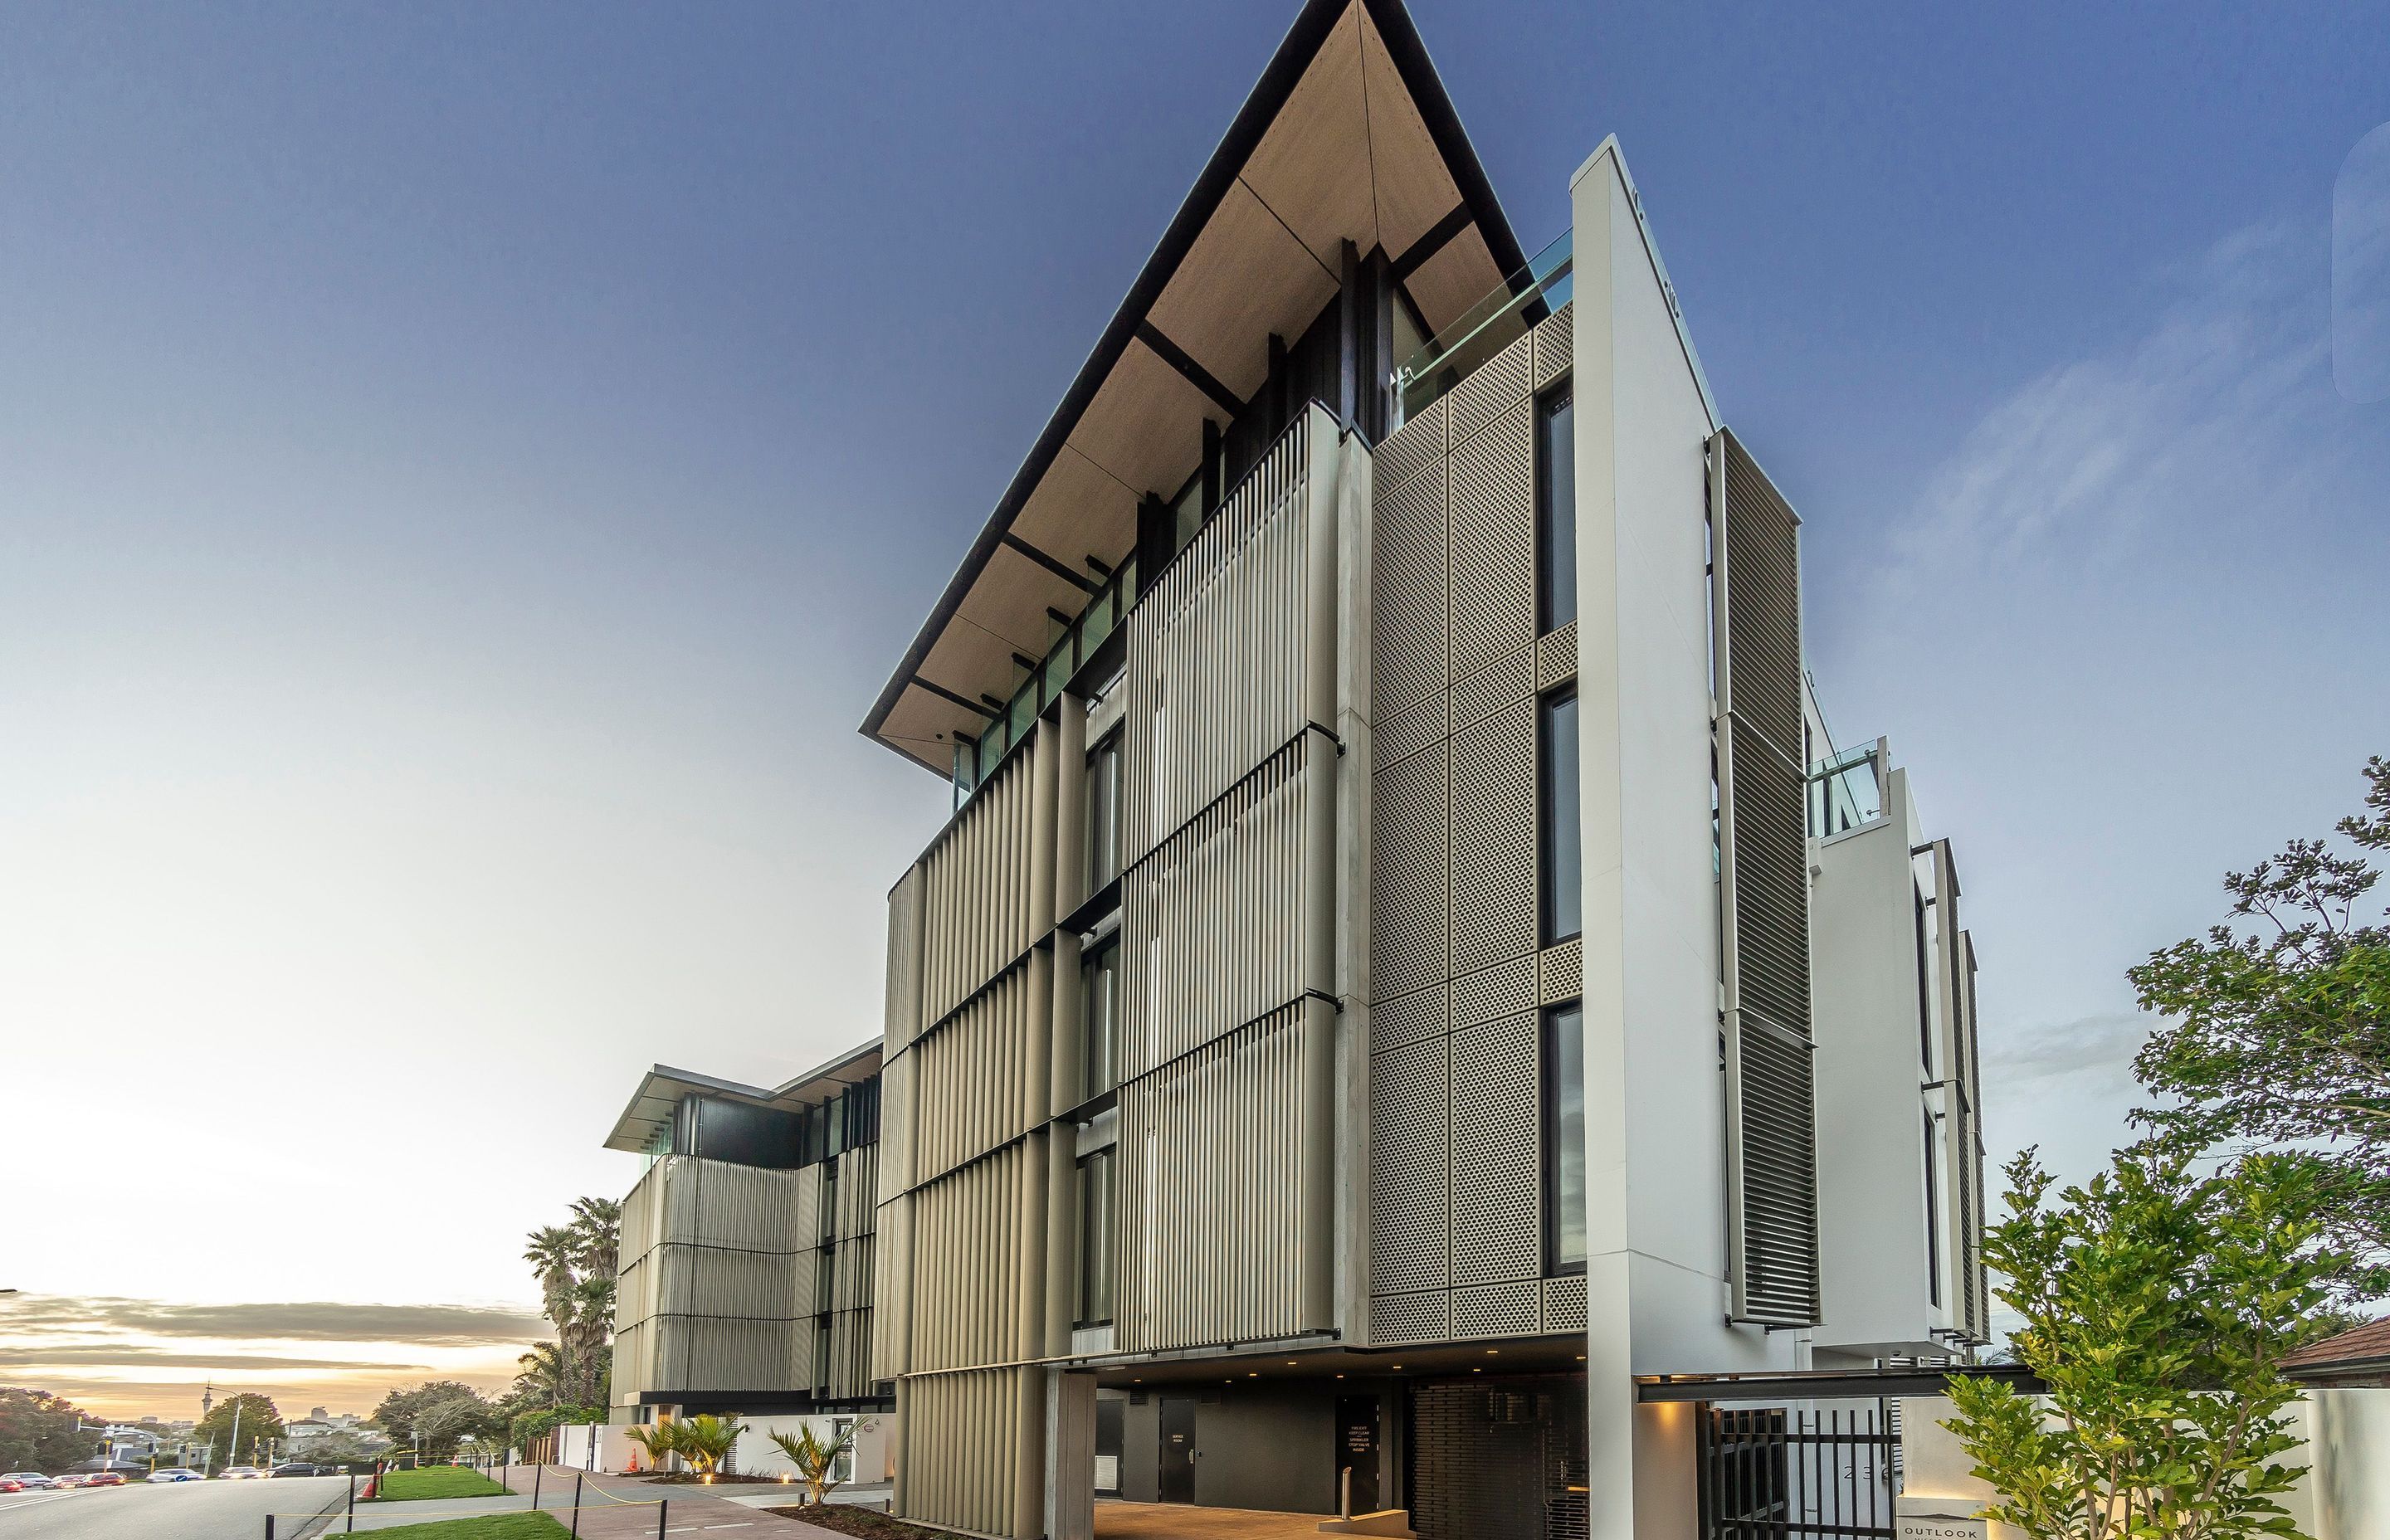 The striking southern facade is defined by bronze anodised aluminium screens that allow for privacy and sun control. 